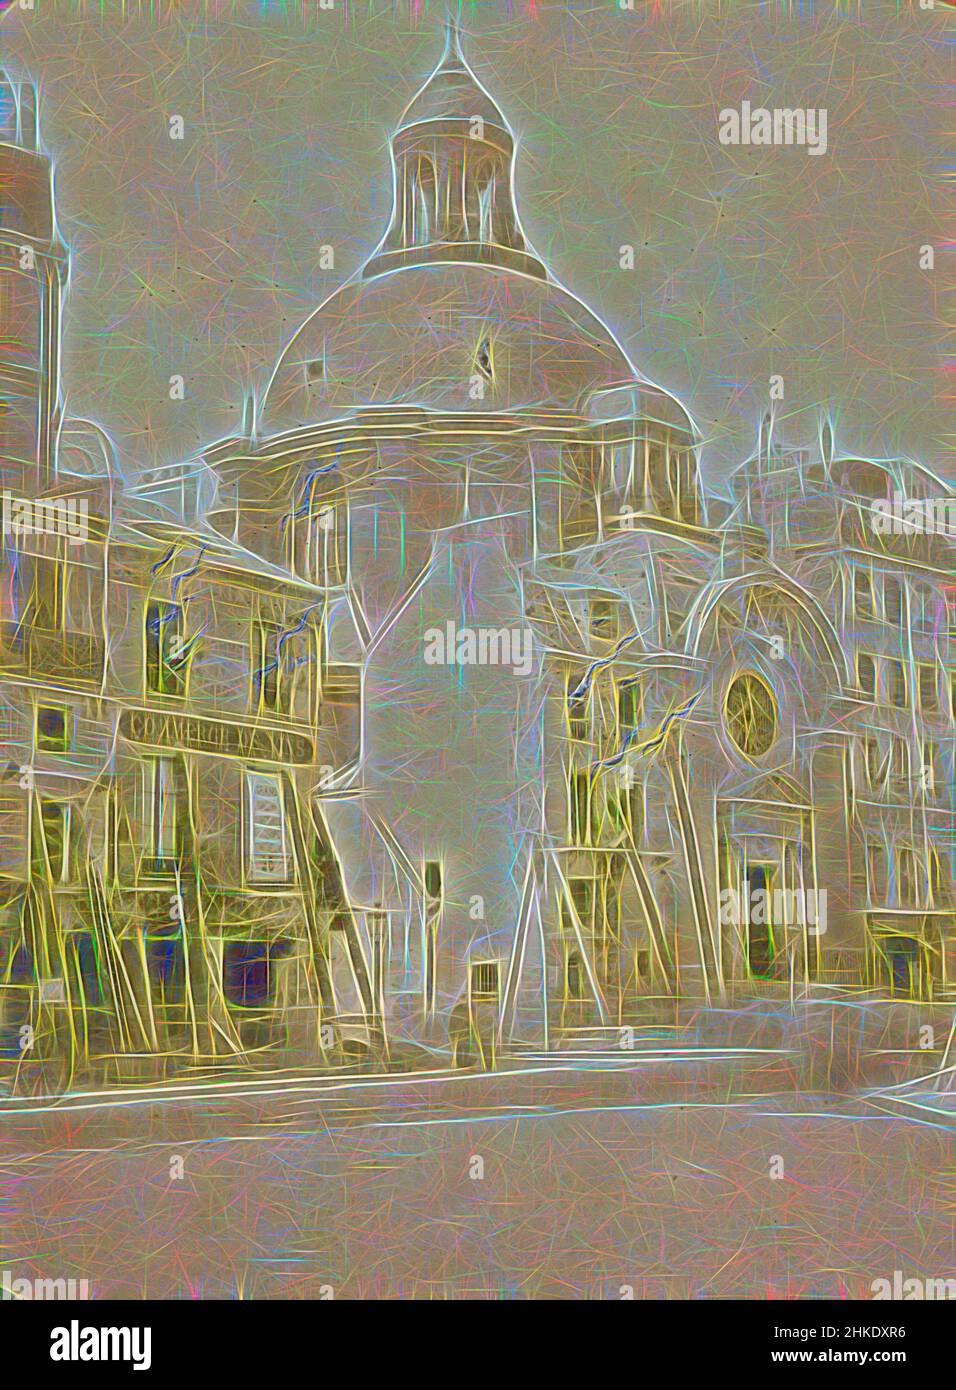 Inspired by Destruction around the Temple du Marais by the Paris Commune, Destructions de la Commune, Eglise Ste Marie (original title), Like stereotissues, this photograph was made to be viewed in transmitted light. This allows color effects and the suggestion of flames to be seen., Eugène Hanau, Reimagined by Artotop. Classic art reinvented with a modern twist. Design of warm cheerful glowing of brightness and light ray radiance. Photography inspired by surrealism and futurism, embracing dynamic energy of modern technology, movement, speed and revolutionize culture Stock Photo